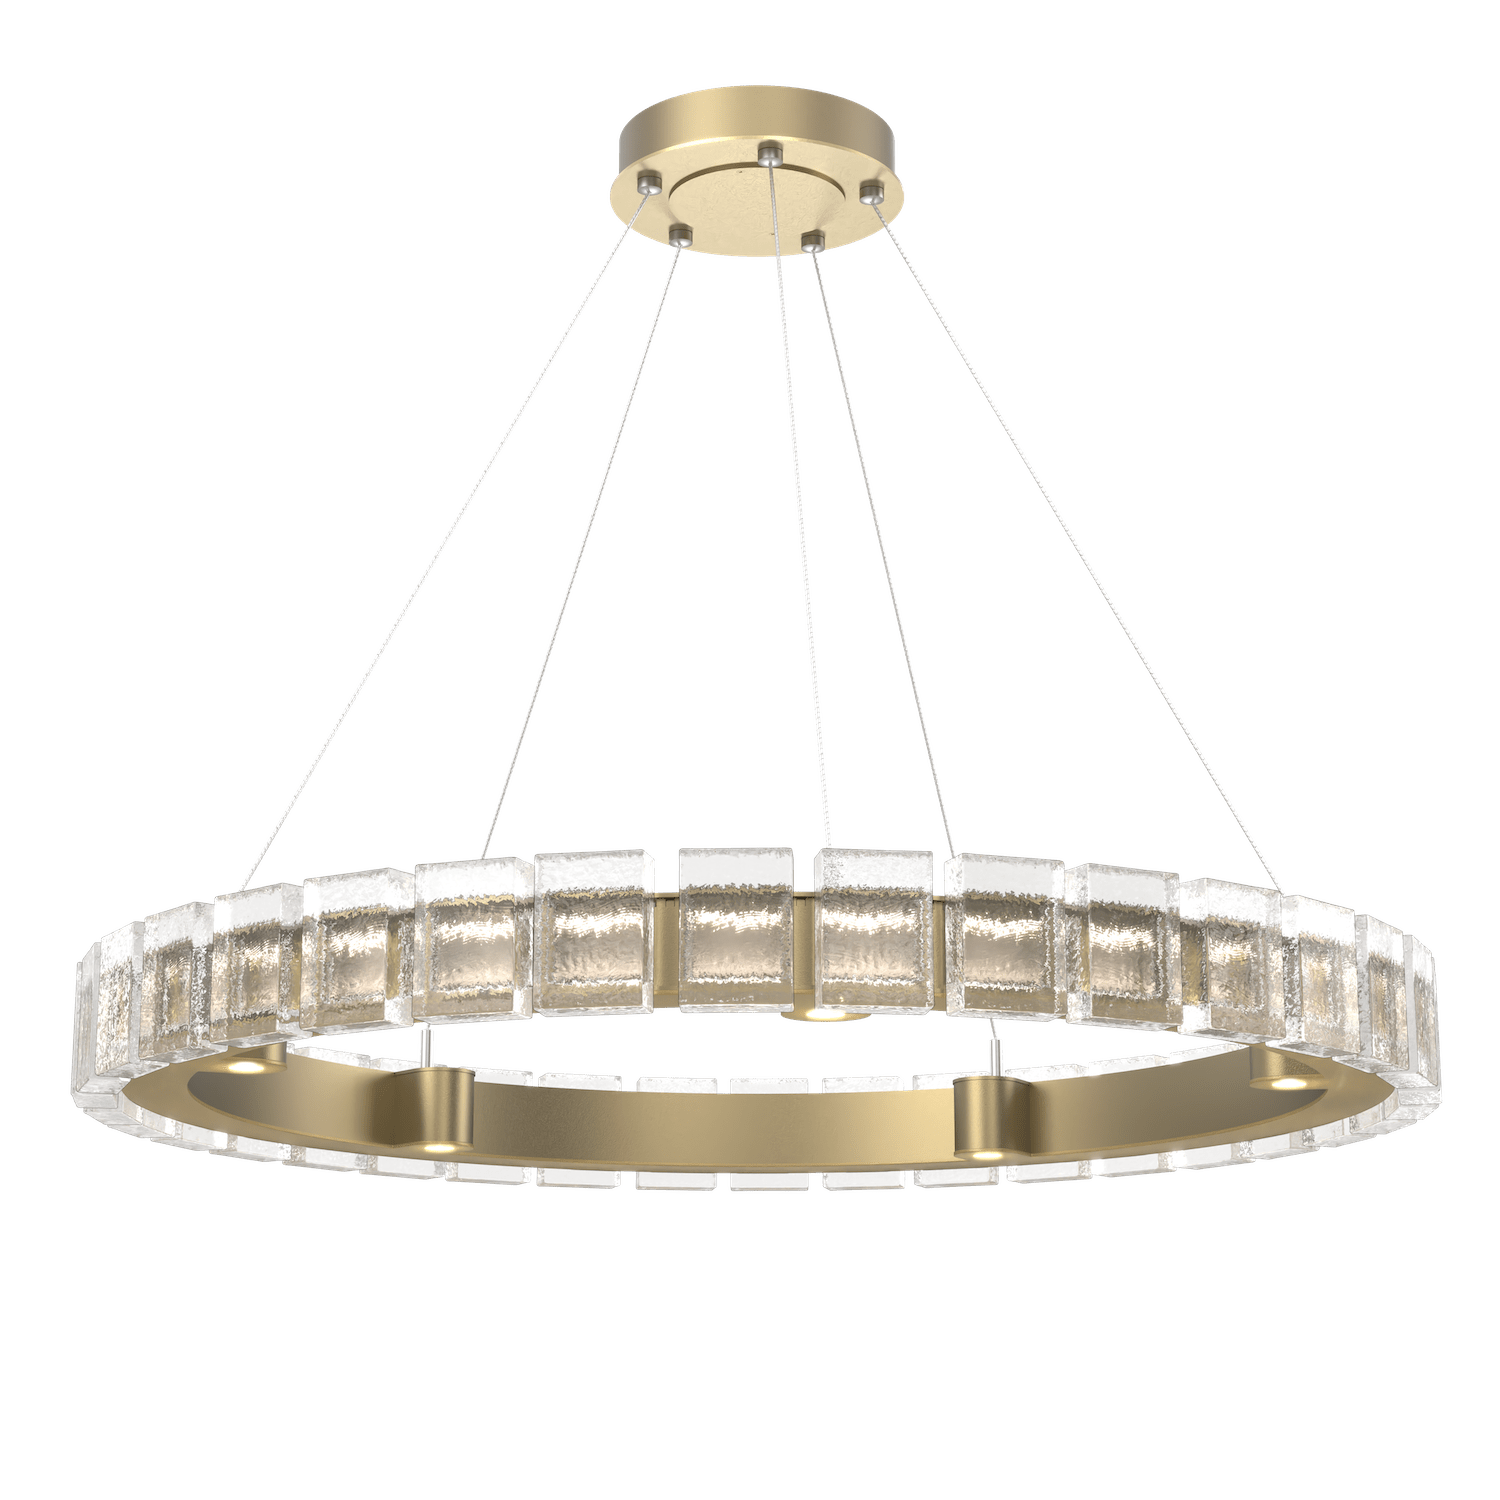 CHB0087-38-GB-TP-Hammerton-Studio-Tessera-38-inch-ring-chandelier-with-gilded-brass-finish-and-clear-pave-cast-glass-shade-and-LED-lamping